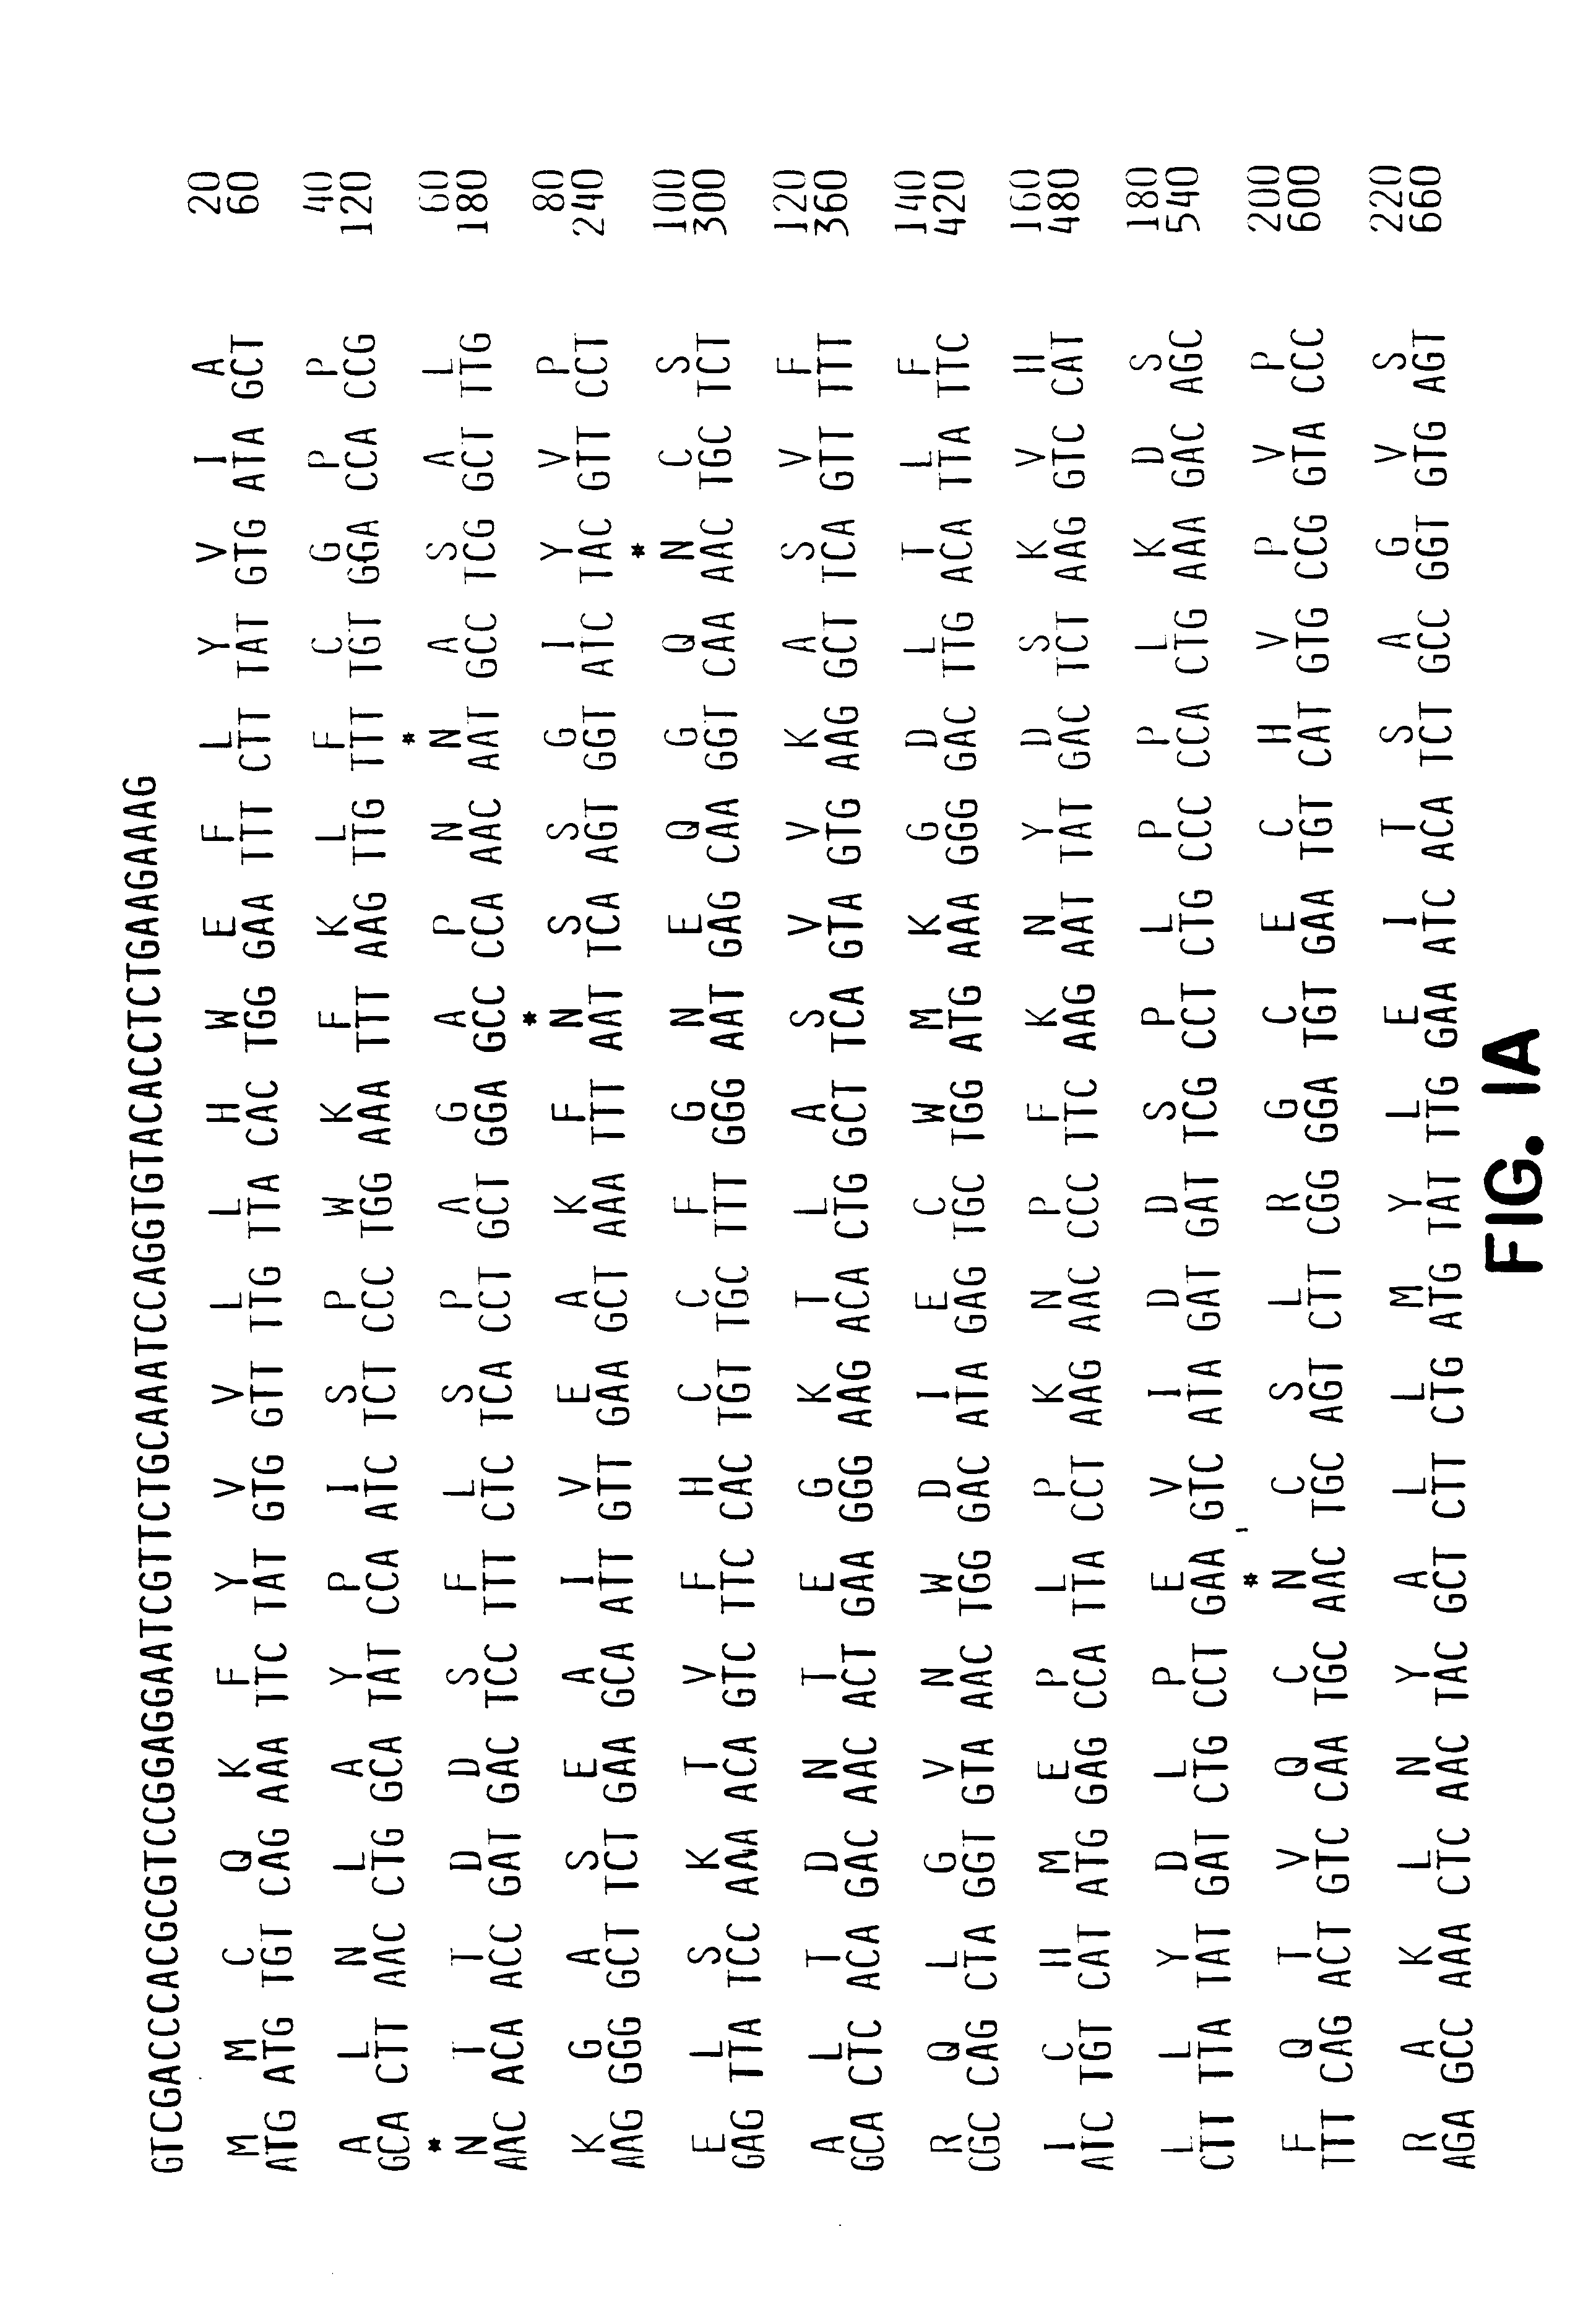 Methods of identifying compounds that modulate body weight using the OB receptor